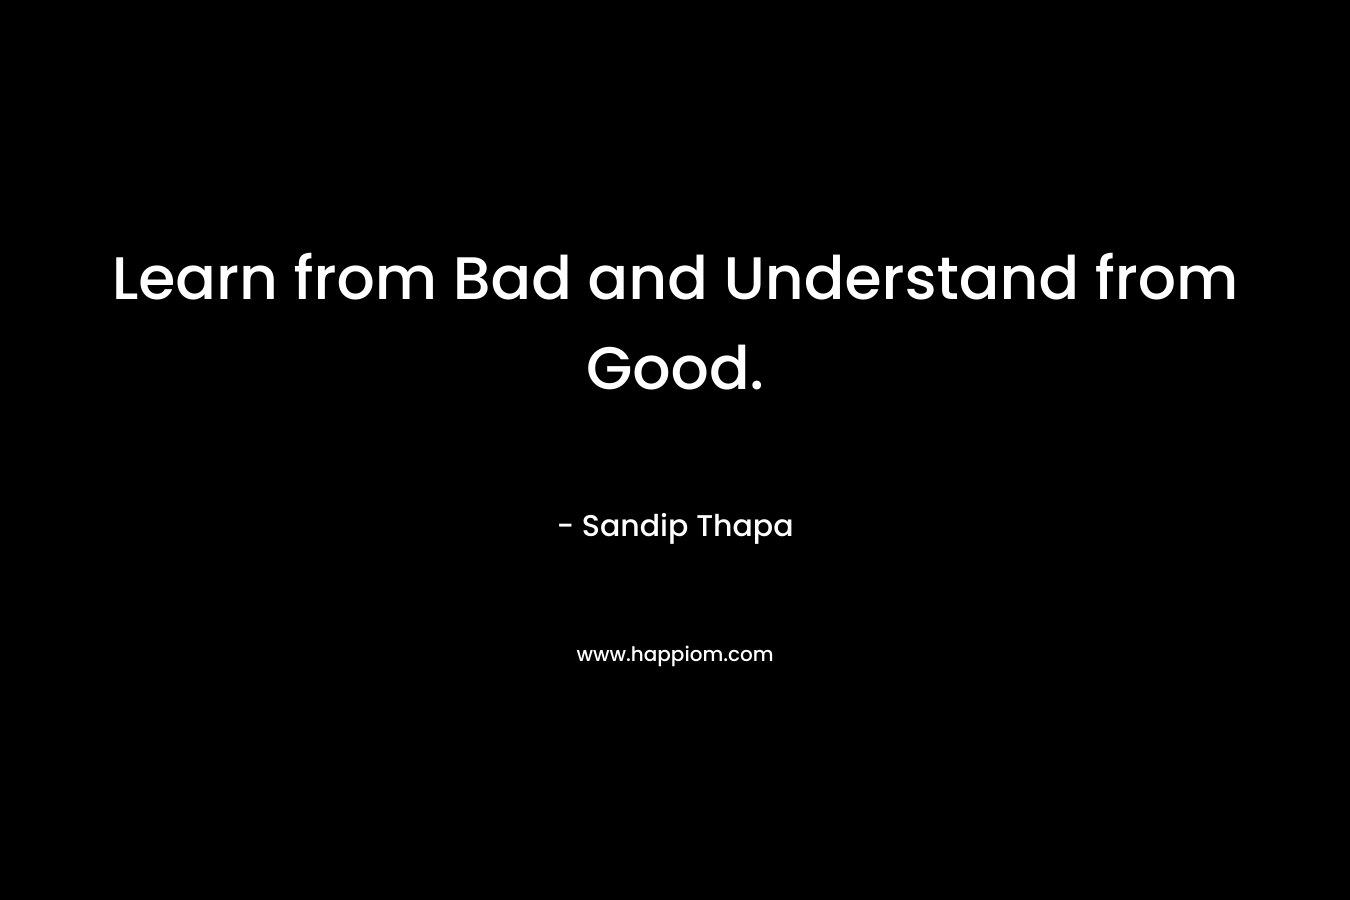 Learn from Bad and Understand from Good.